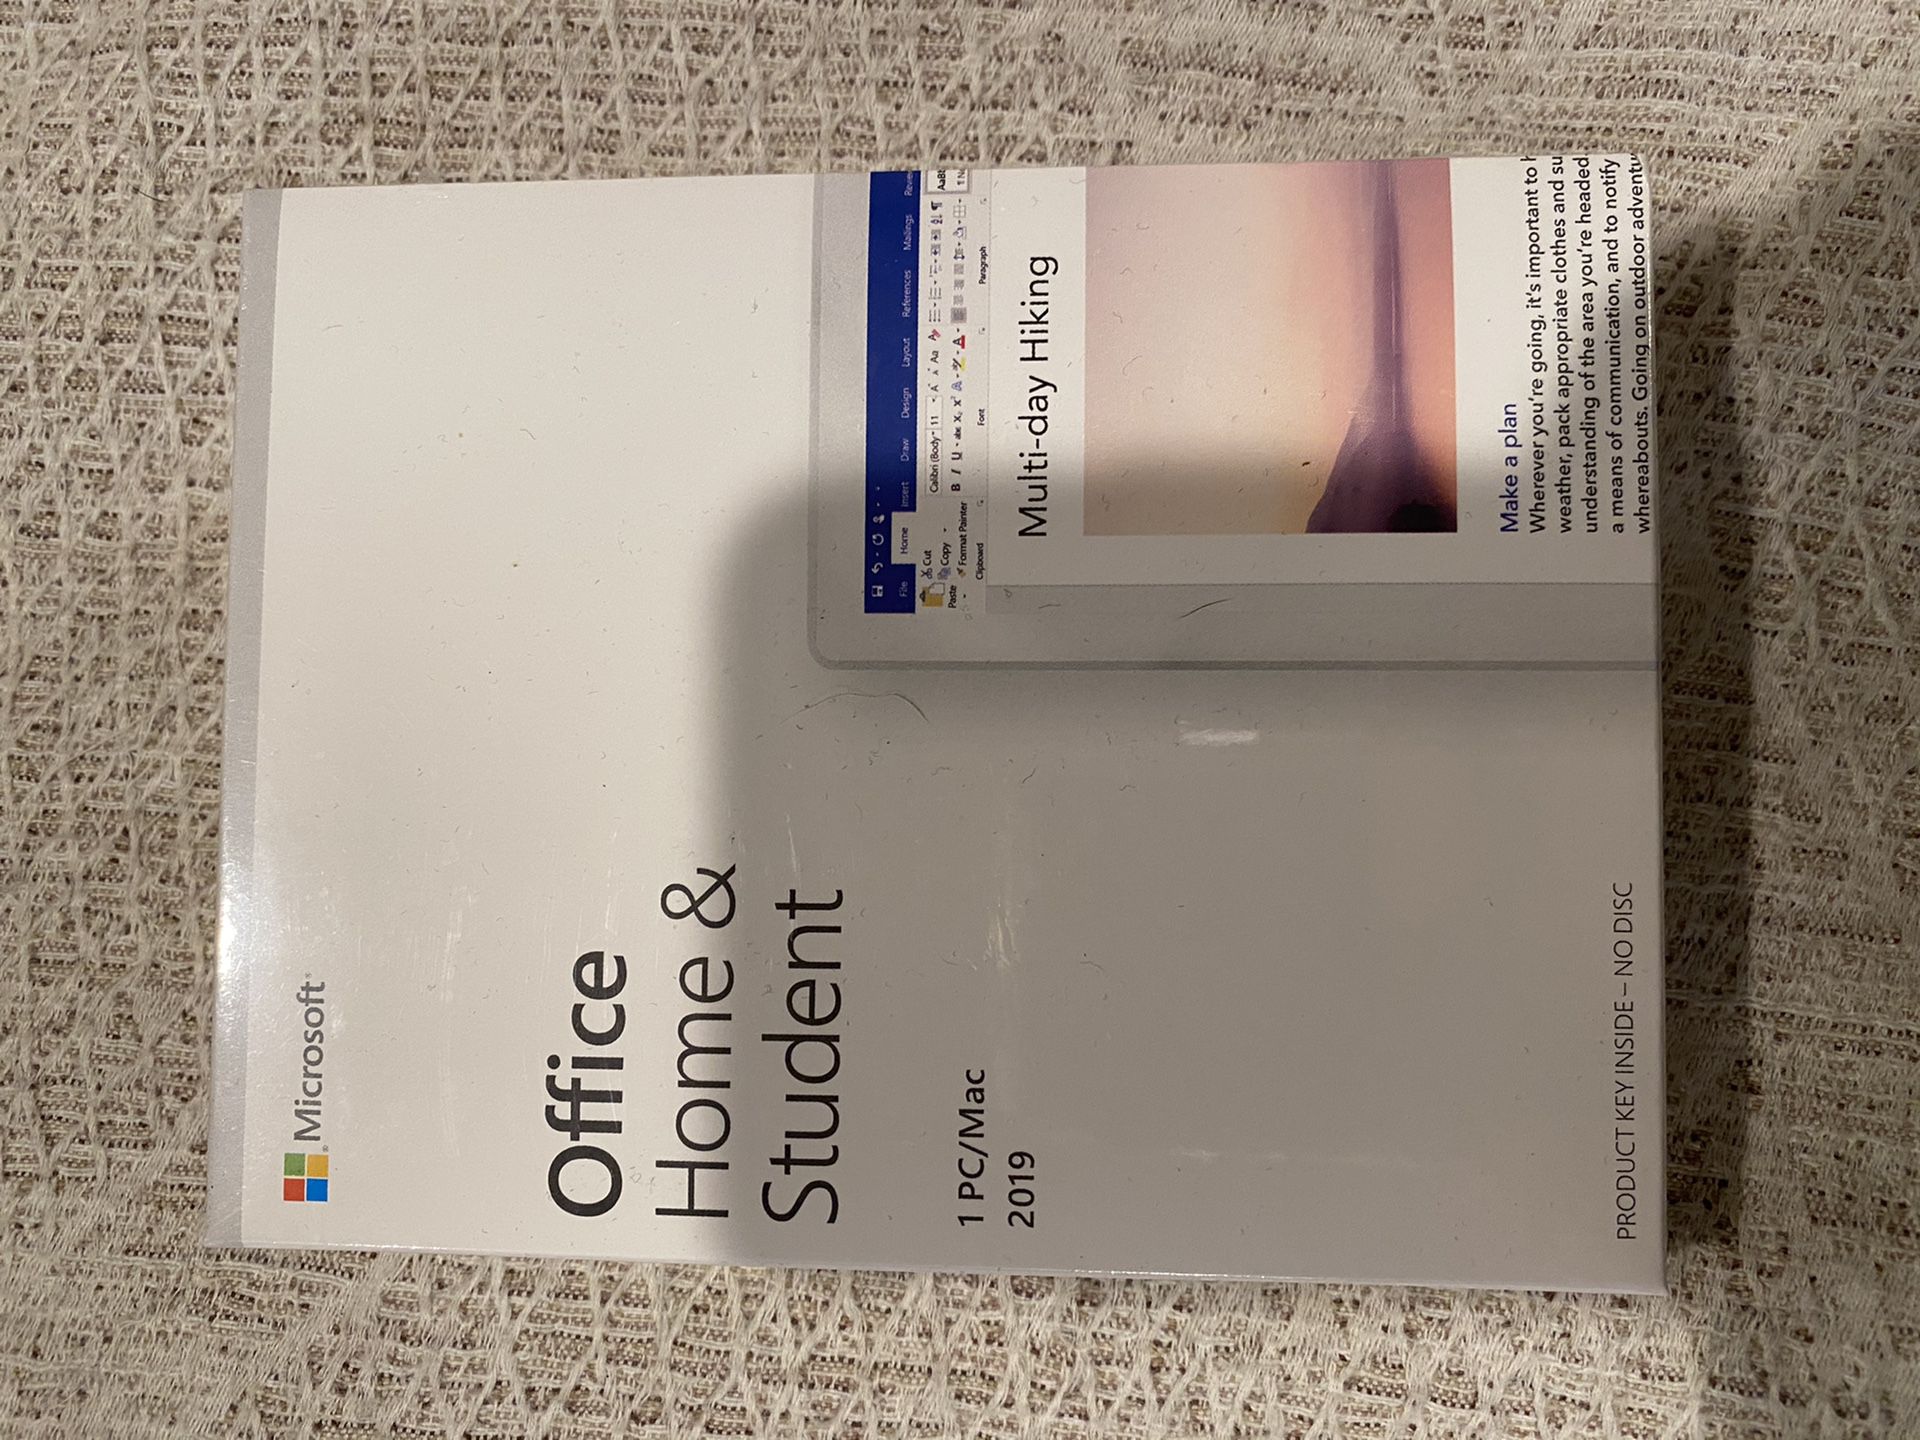 Brand new Microsoft Office suite